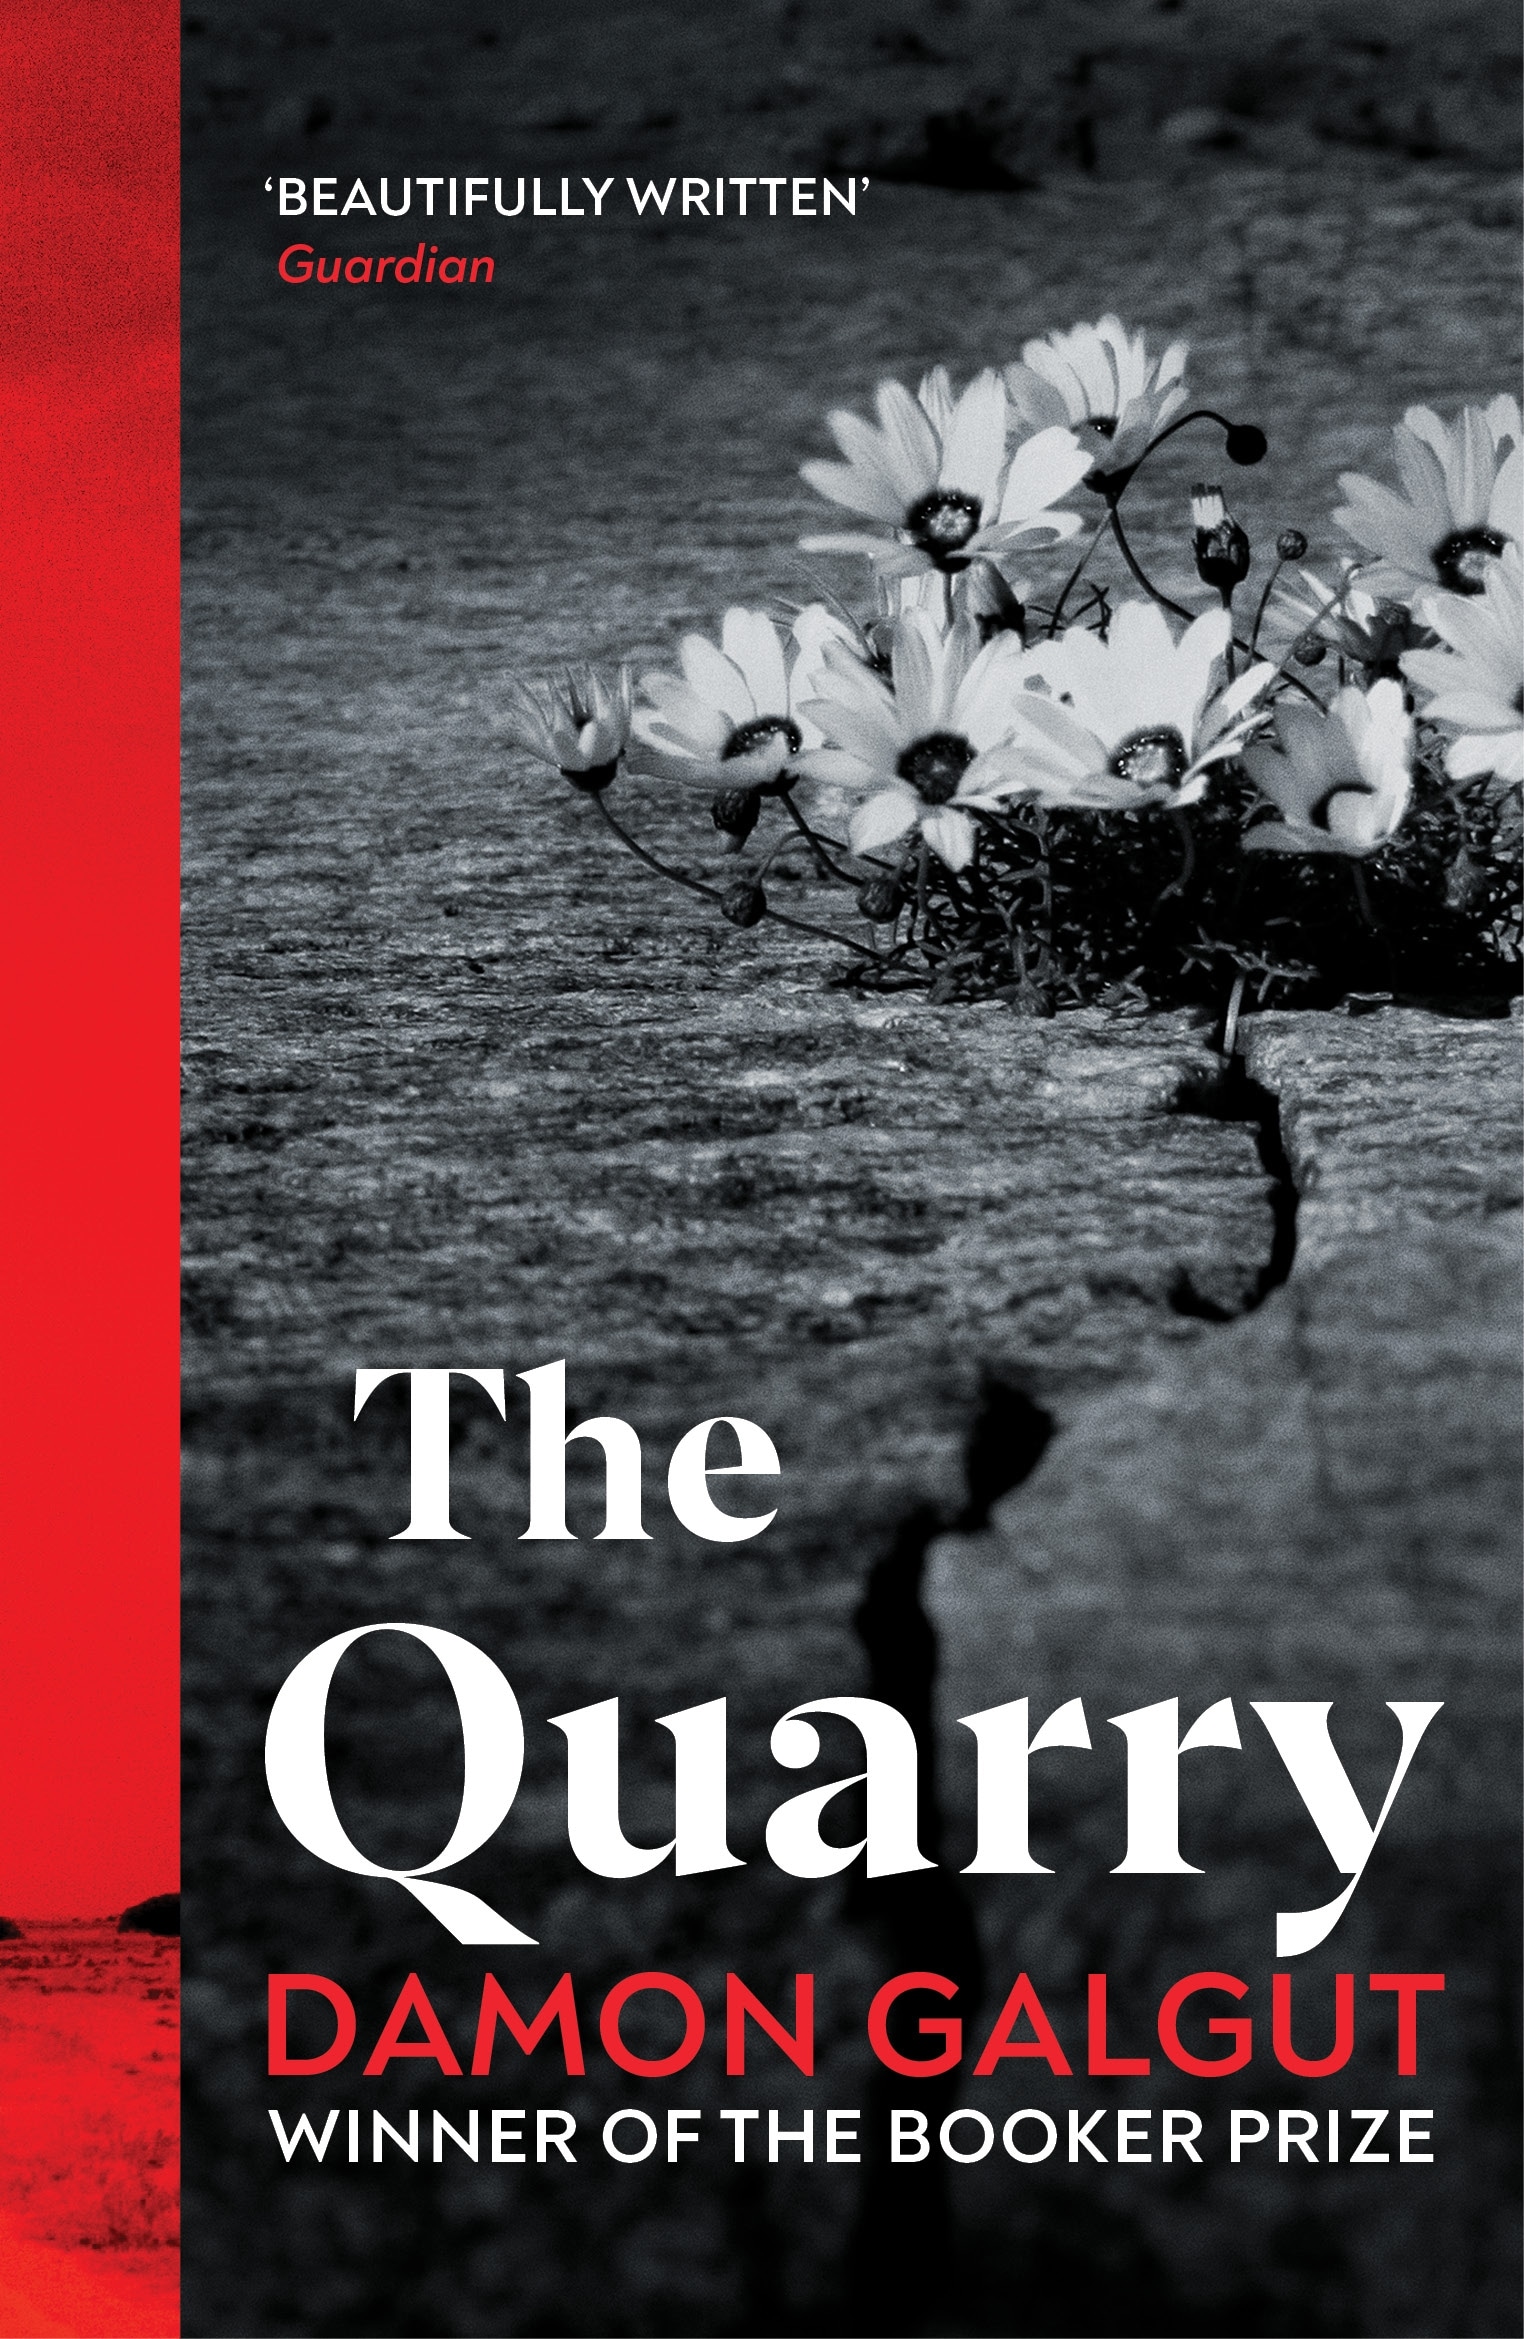 Book “The Quarry” by Damon Galgut — August 18, 2022